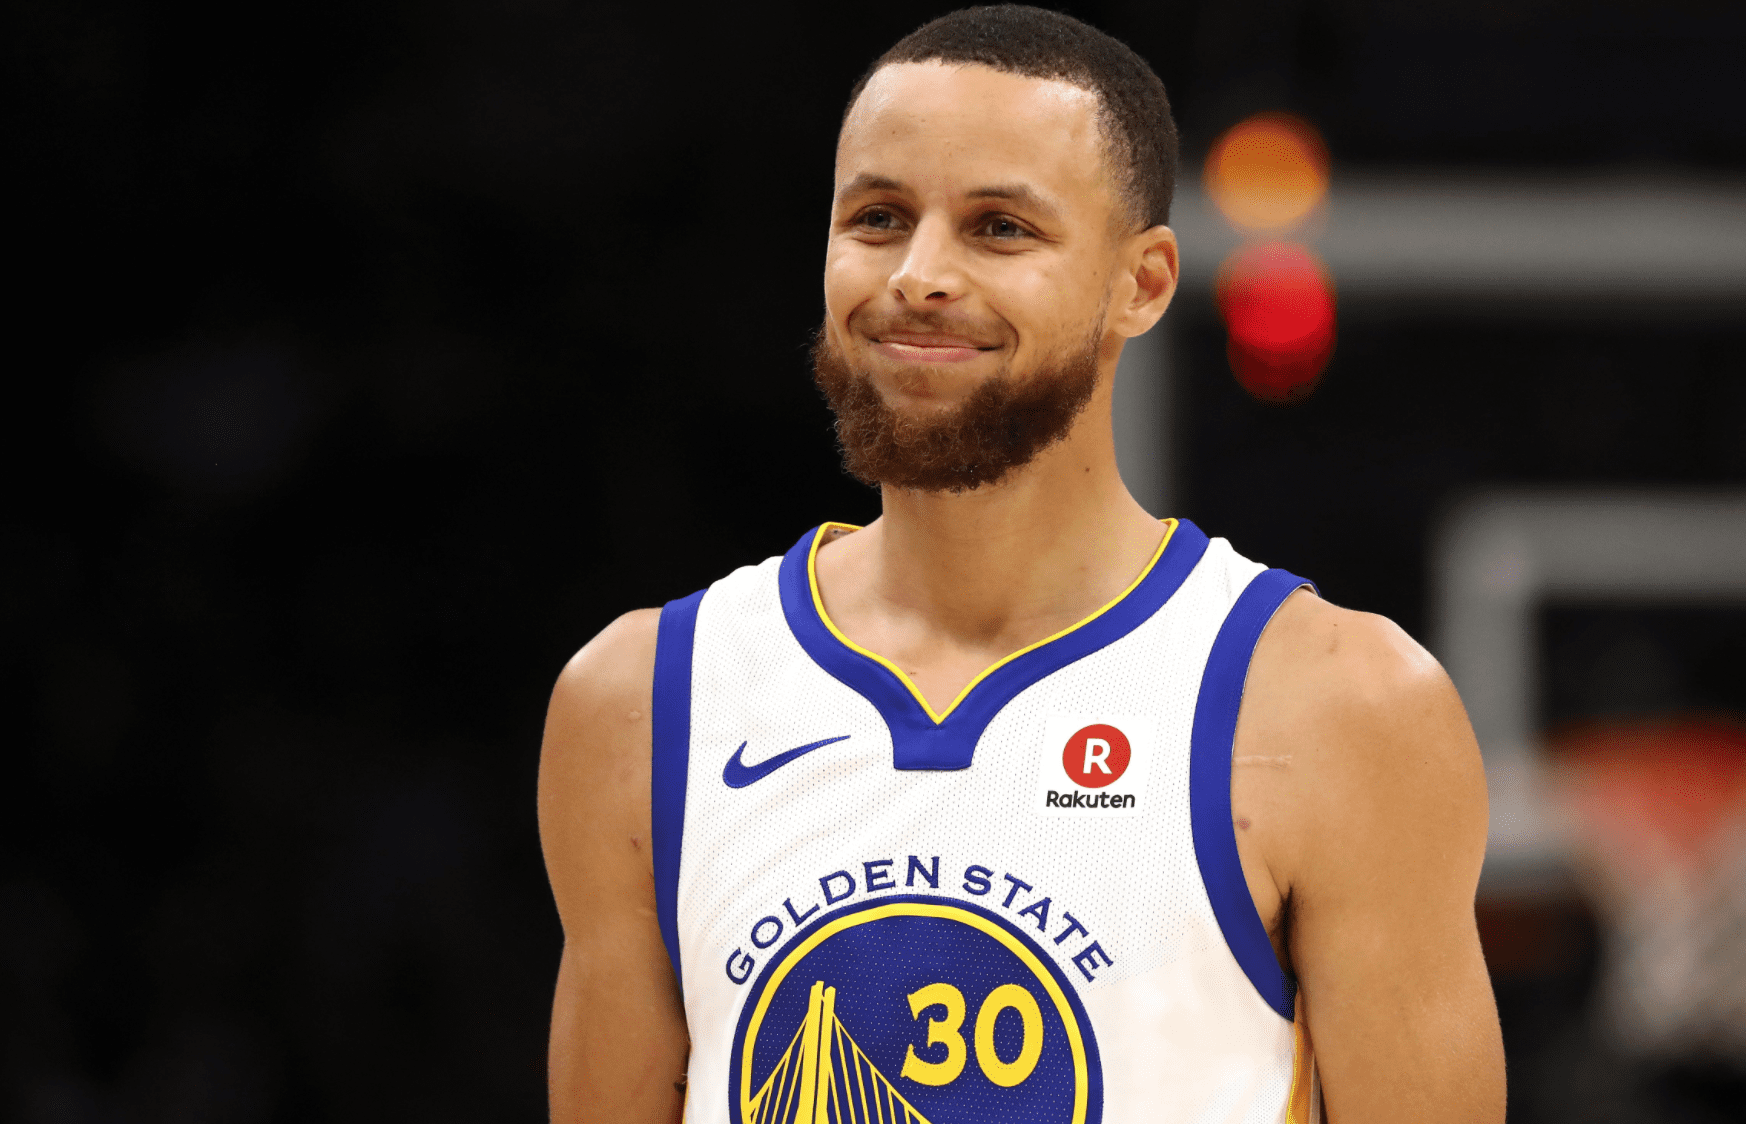 Stephen Curry during a game against the Cleveland Cavaliers at the 2018 NBA Finals on June 8, 2018 in Cleveland, Ohio. | Source: Getty Images